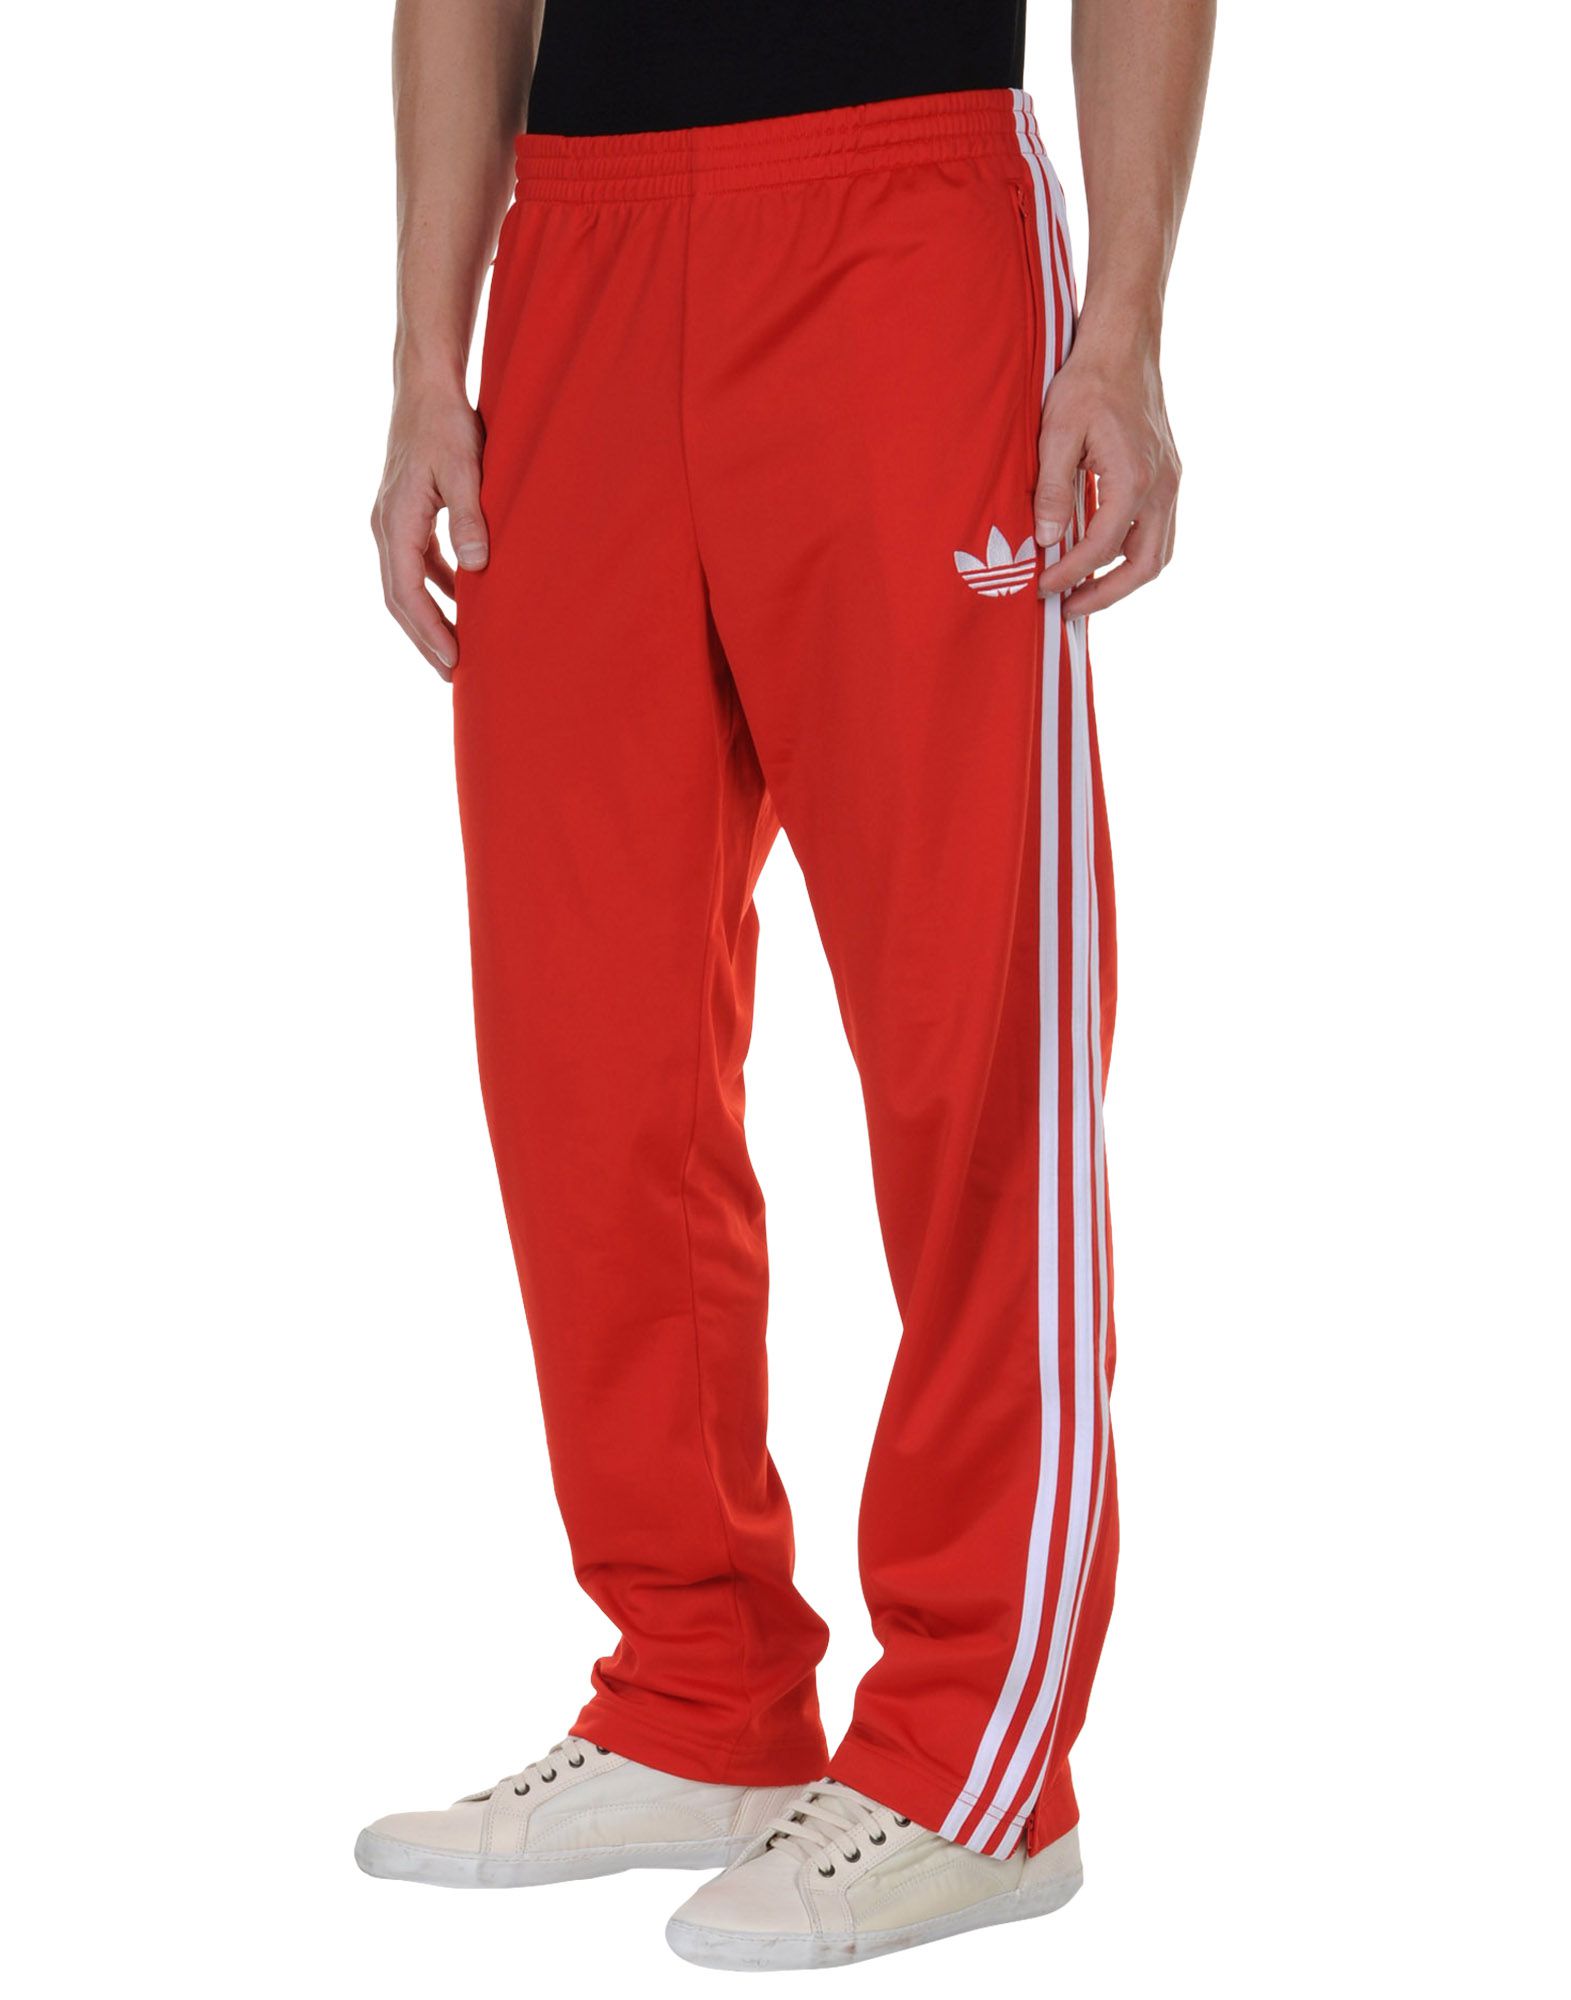 adidas Sweatpants in Blue (Red) for Men - Lyst